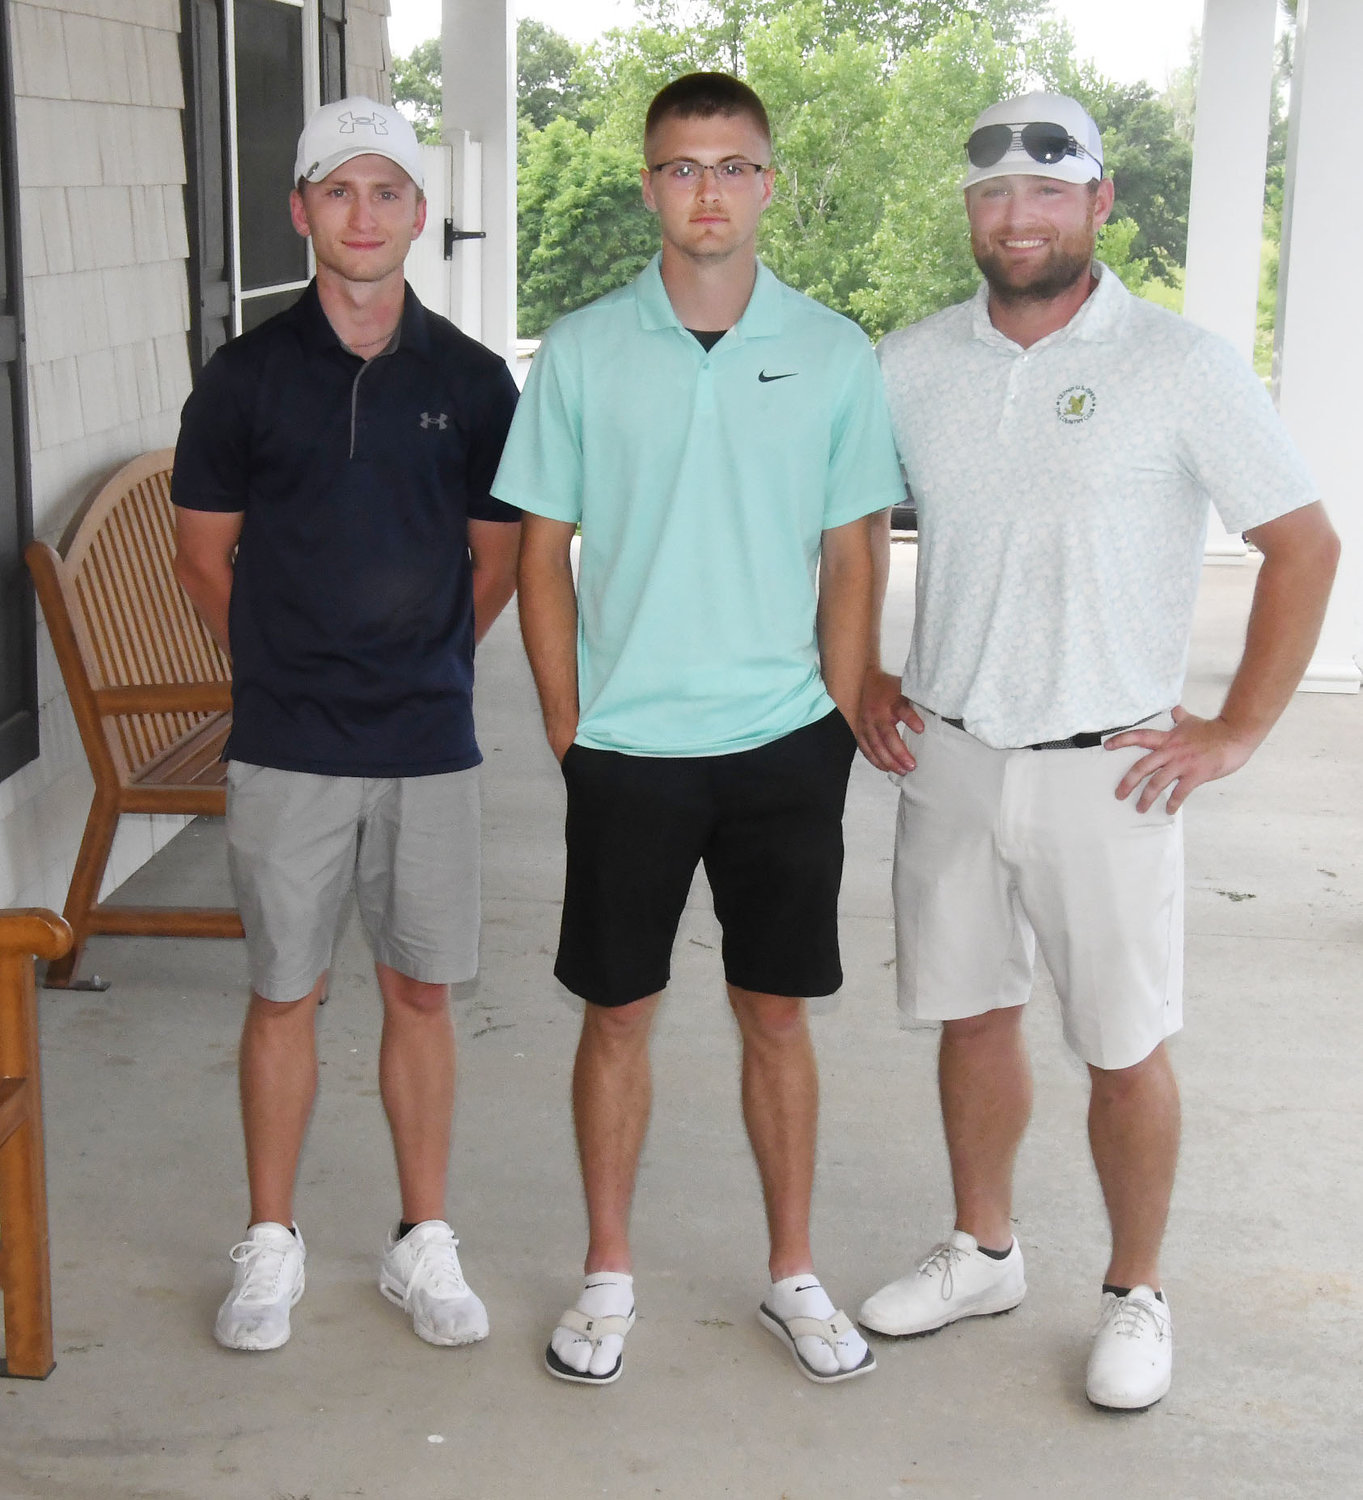 Kenny Stone, Brandon Hatfield and Derrick Nickerson also teamed up to shoot 50, tying for first at the Moberly Booster Club tournament. This event featured a best-ball, four-player format. Mickey Sires is missing from the photograph.